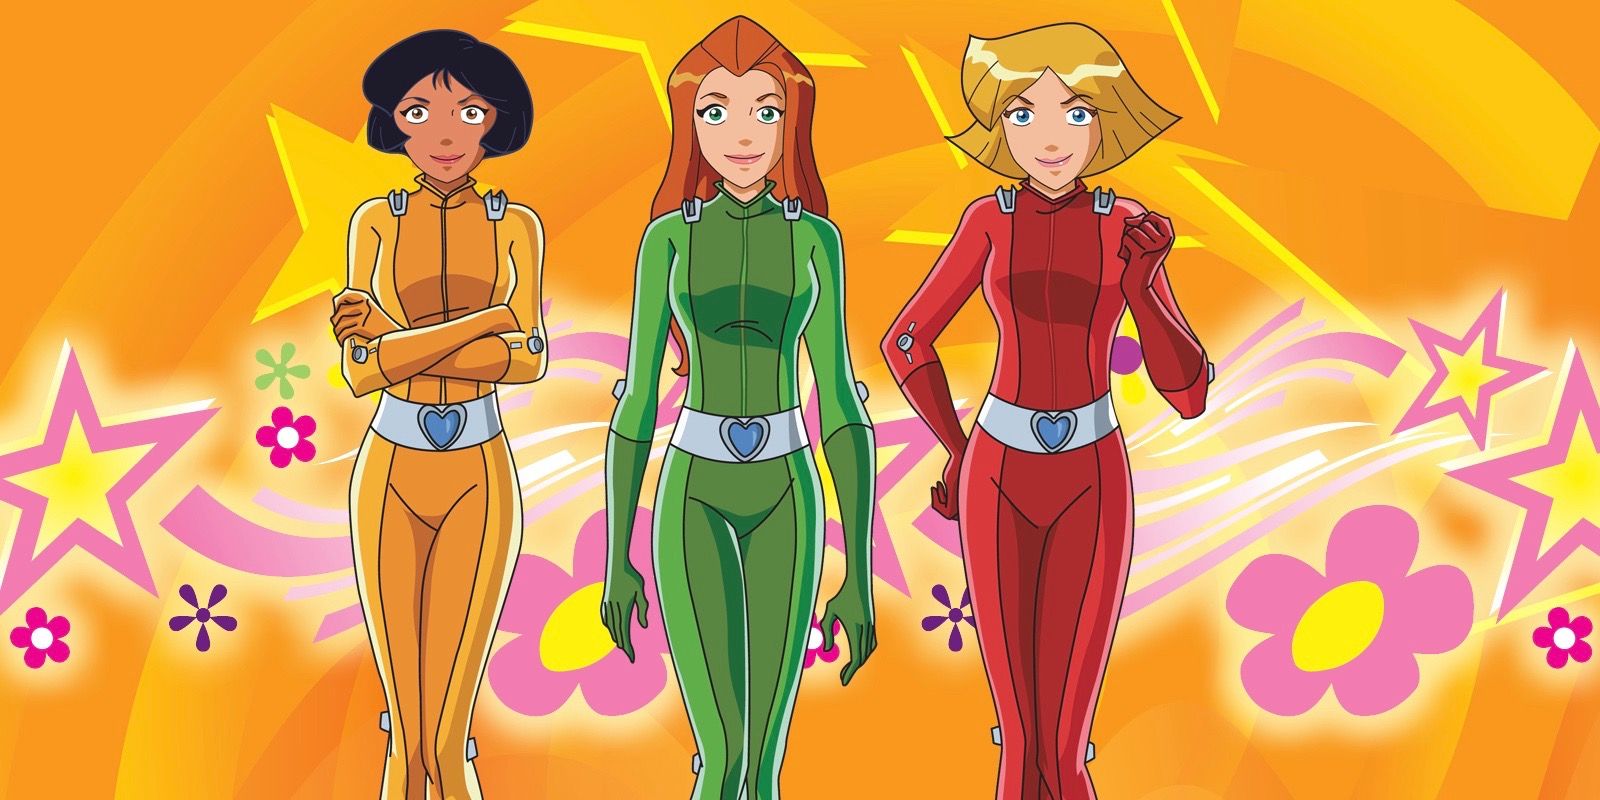 The main characters from Totally Spies!